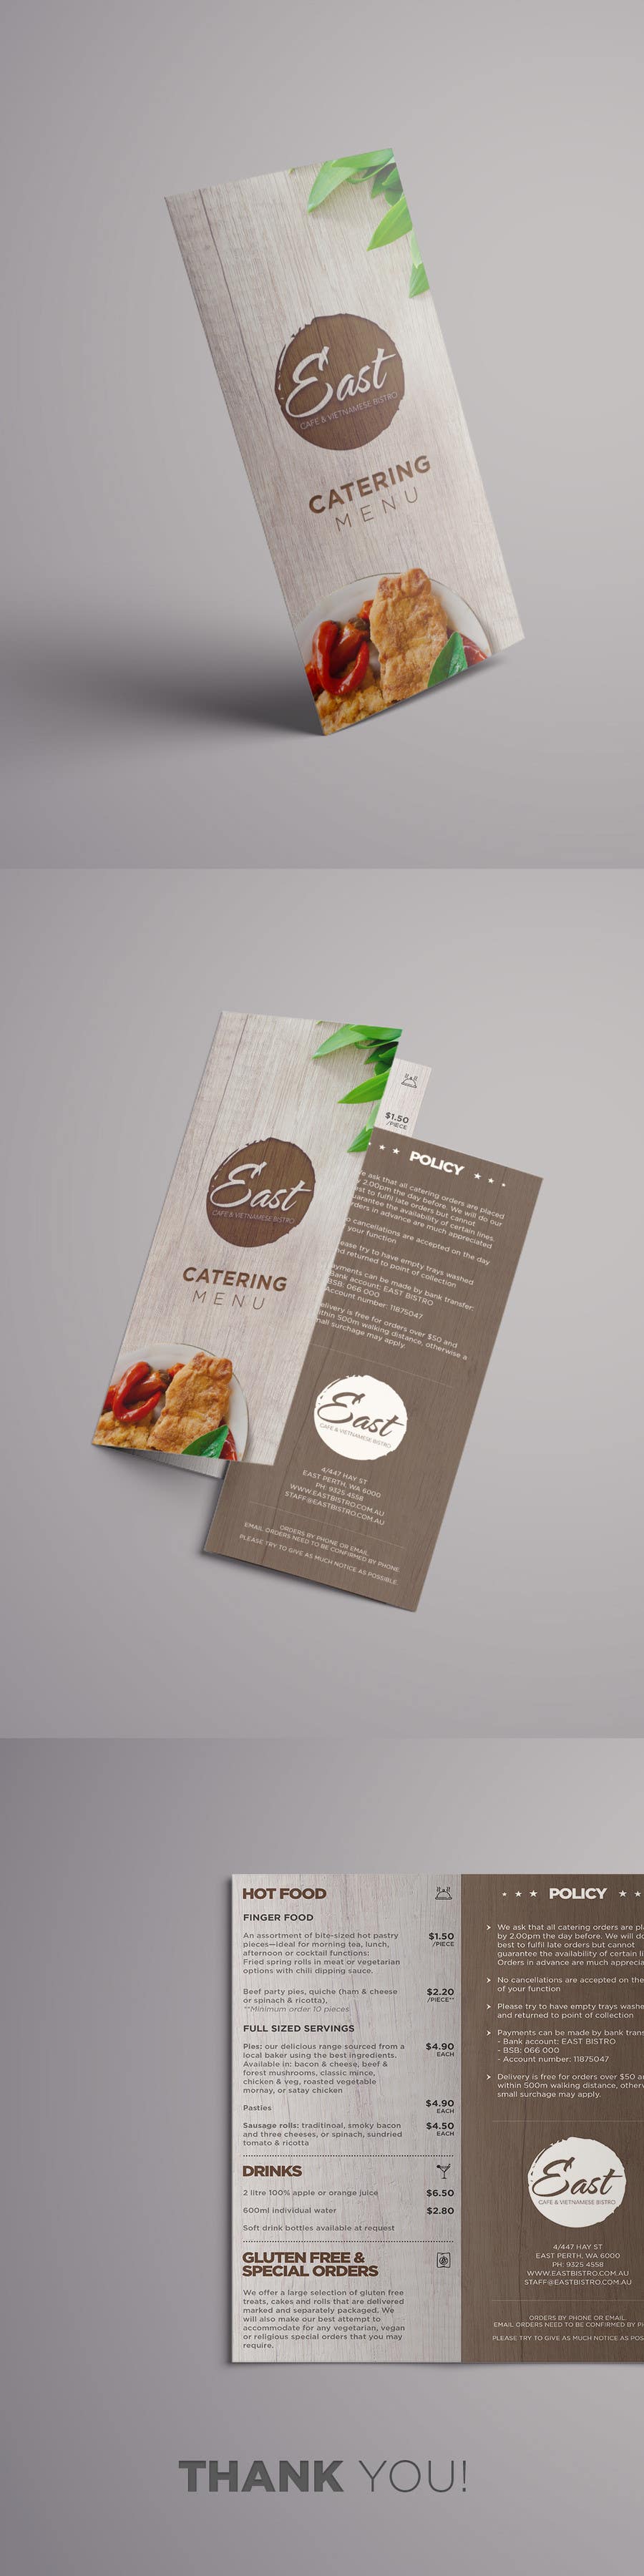 Contest Entry #23 for                                                 Design a brochure / redesign my catering menu
                                            